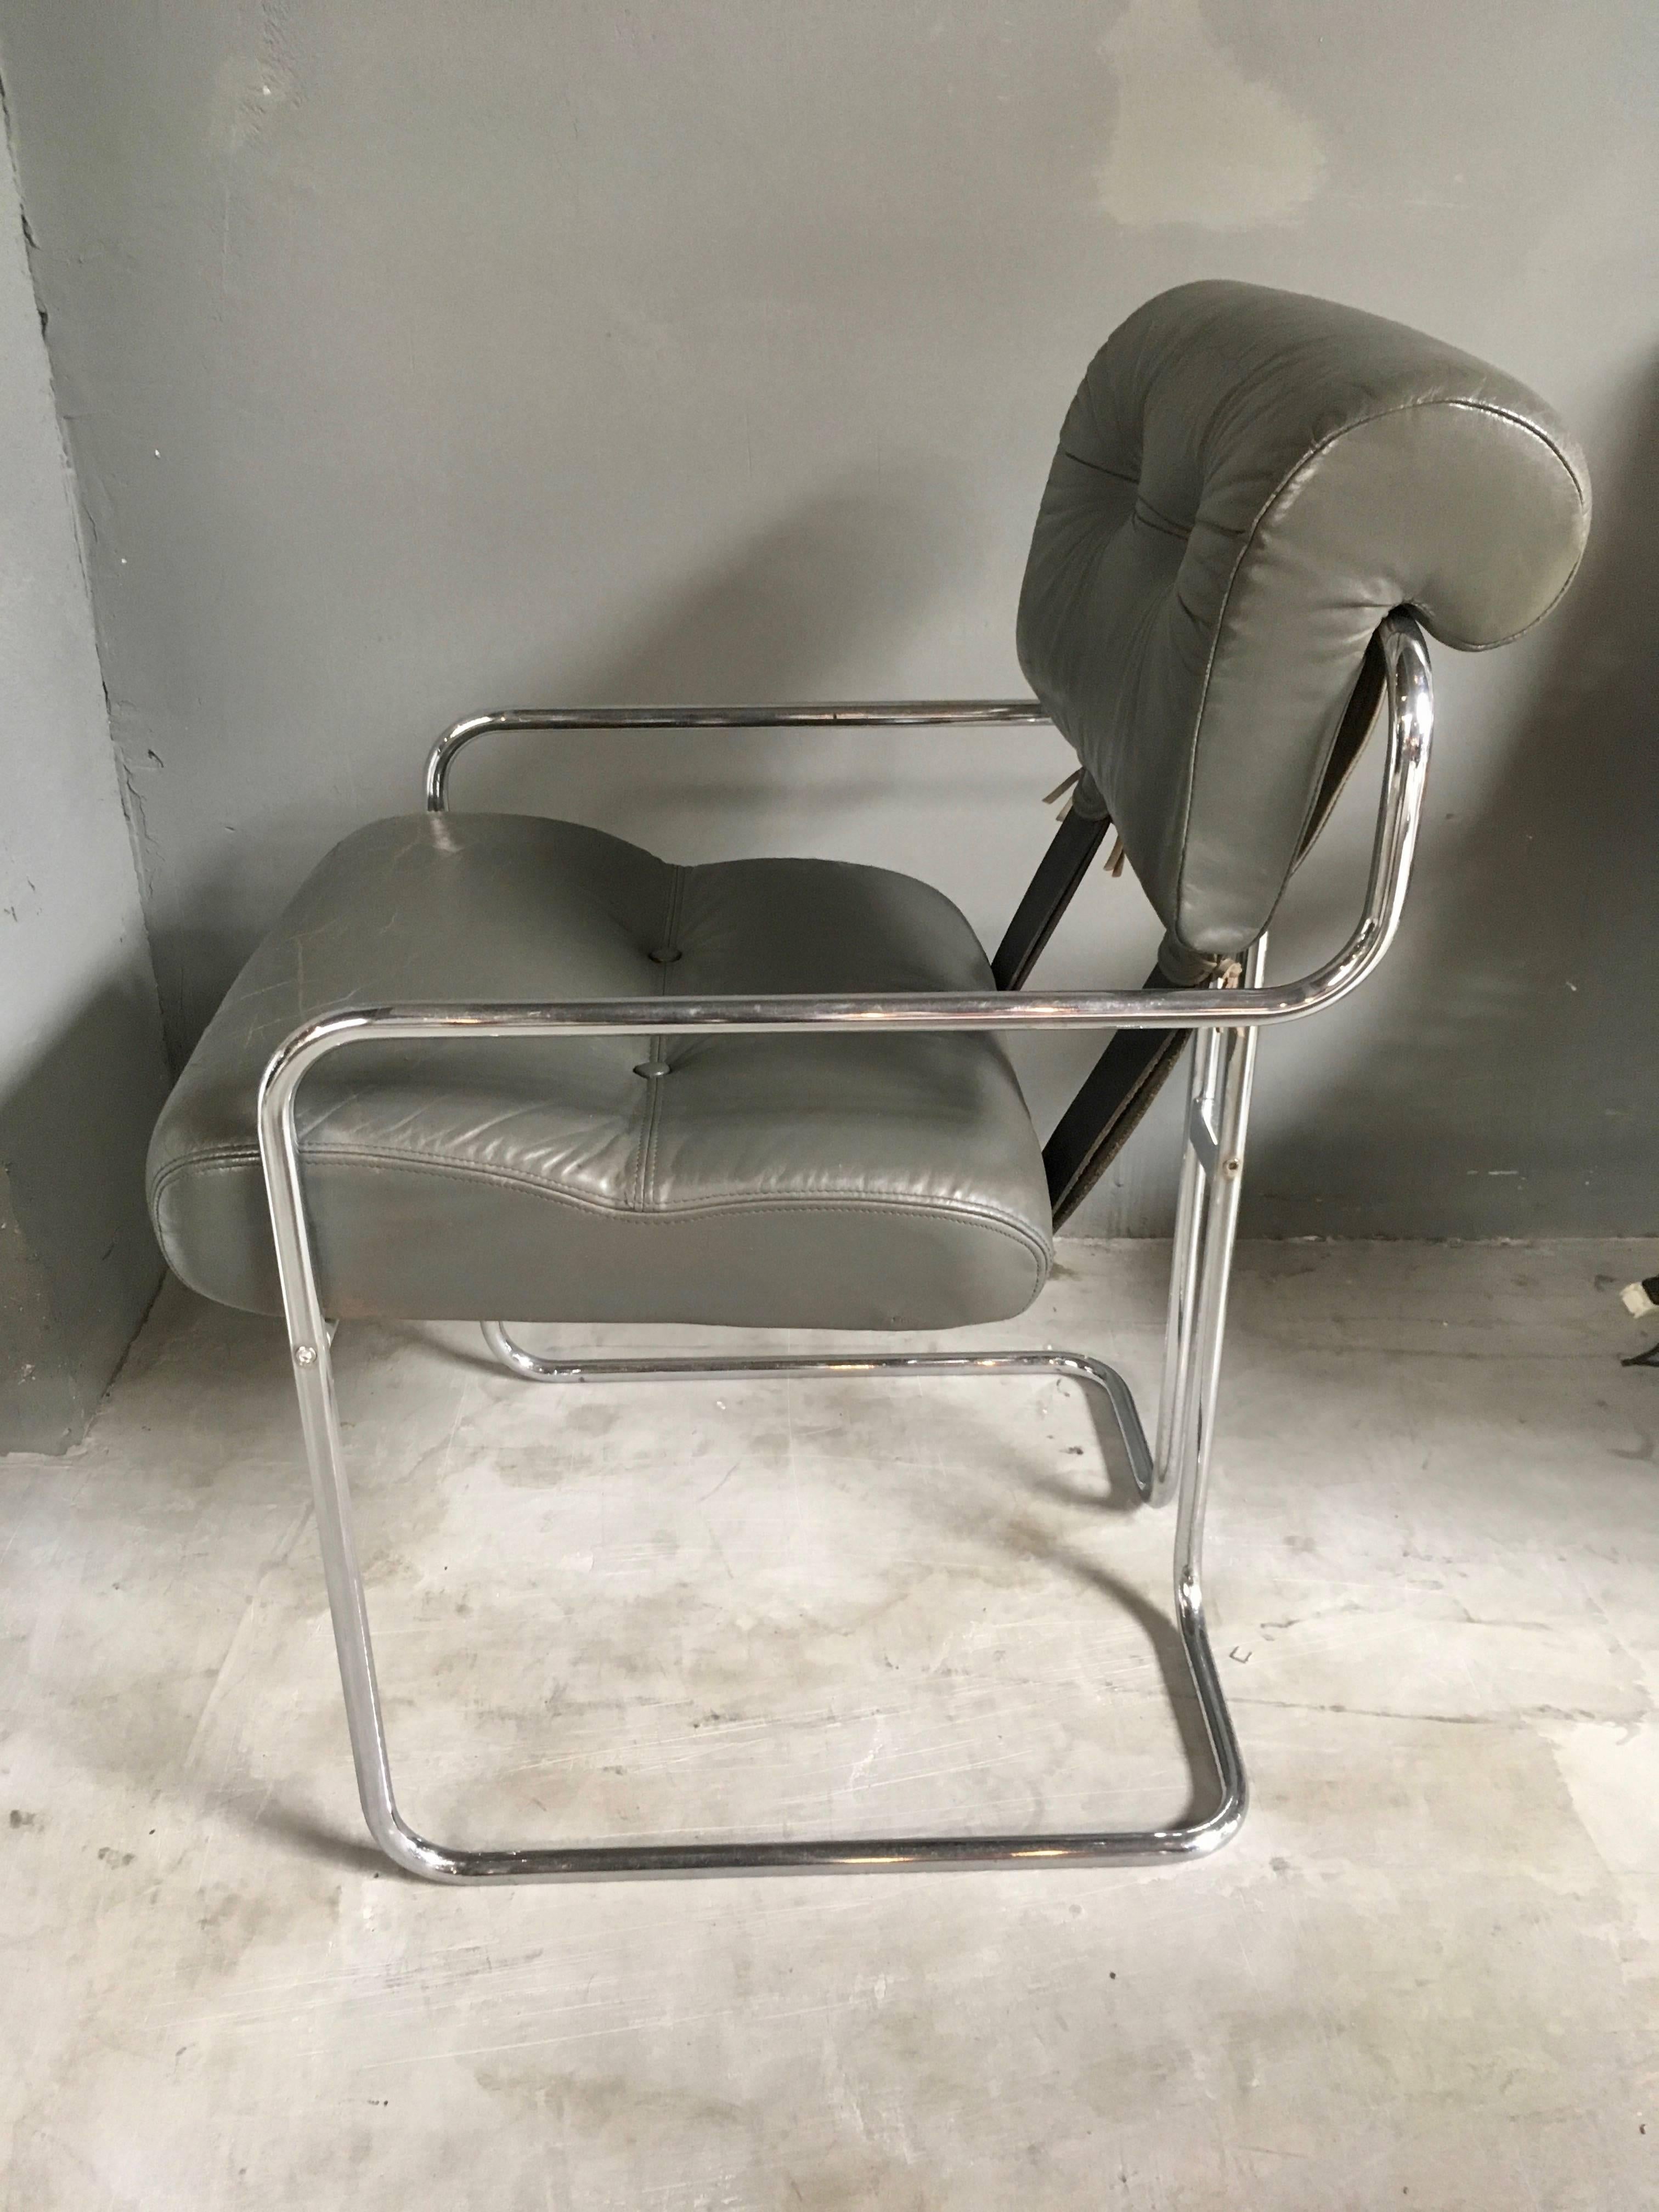 Classic leather chair by Guido Faleschini for Pace. Chrome chair with grey leather. Great color and patina to leather. Extremely comfortable chairs. Repair on seat. Only one available.